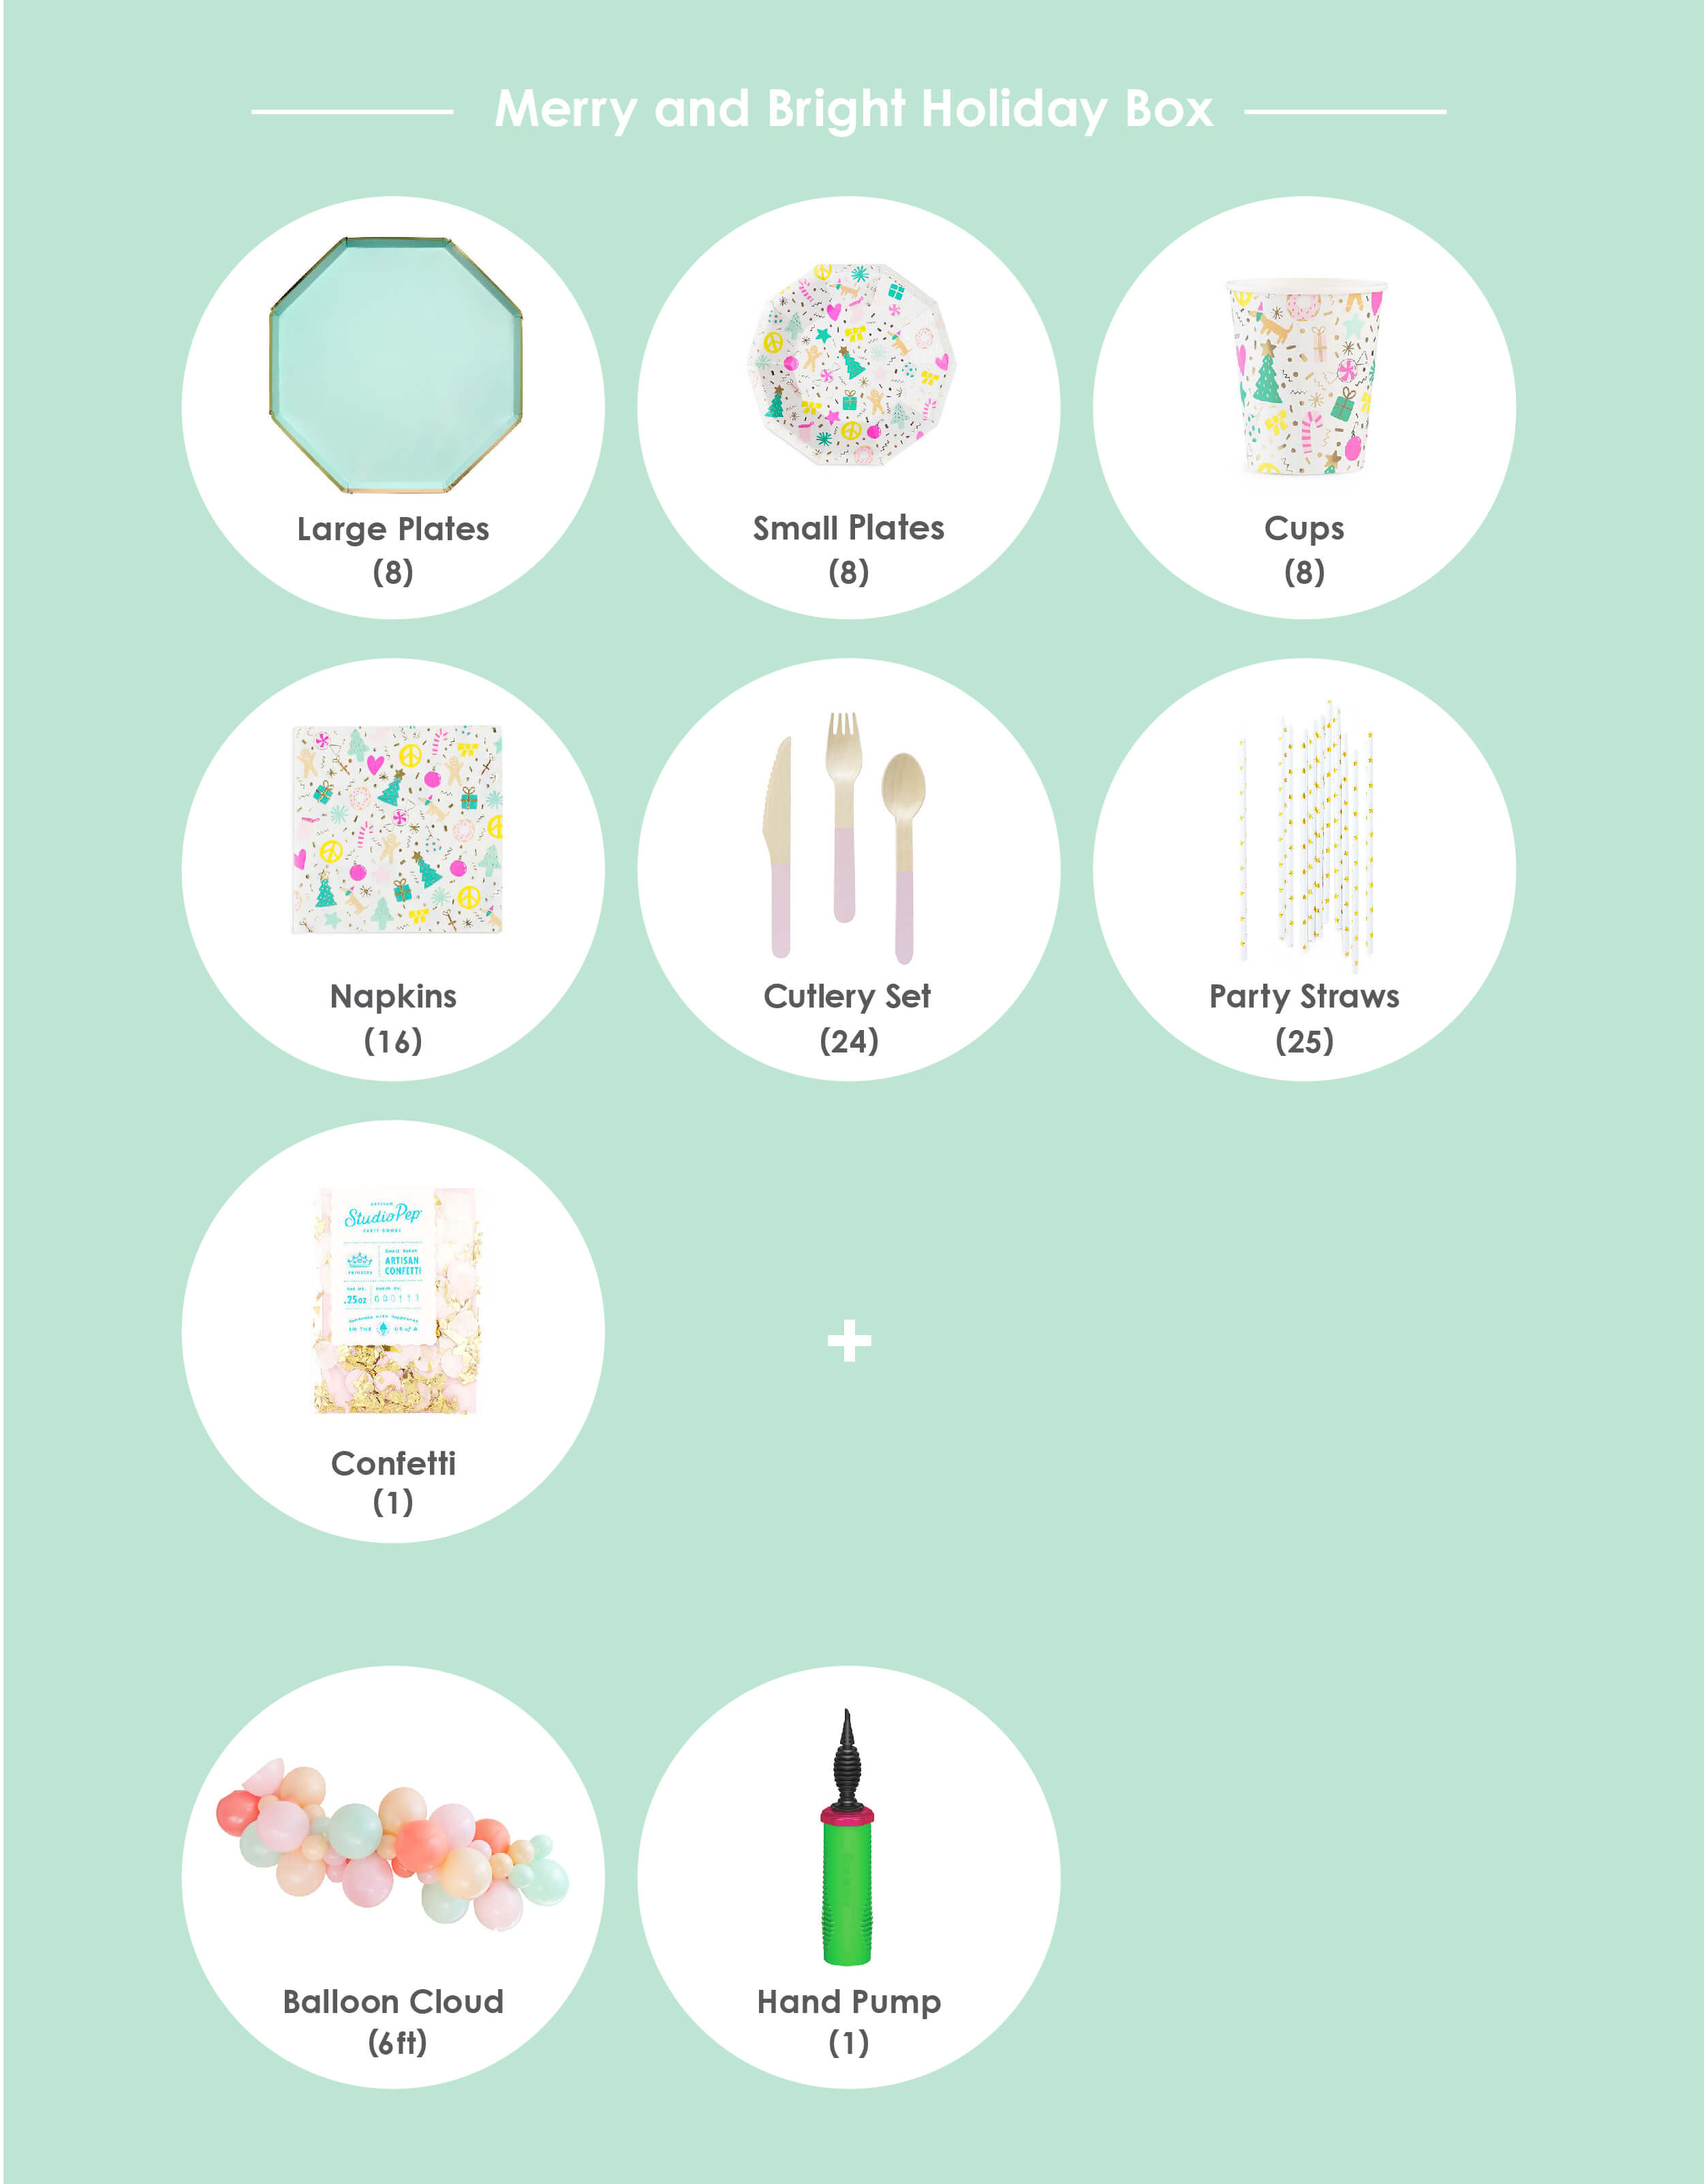 Itemized Product List of Modern Party in the Box, for a Merry and Bright, Pastel Color themed Christmas Celebration